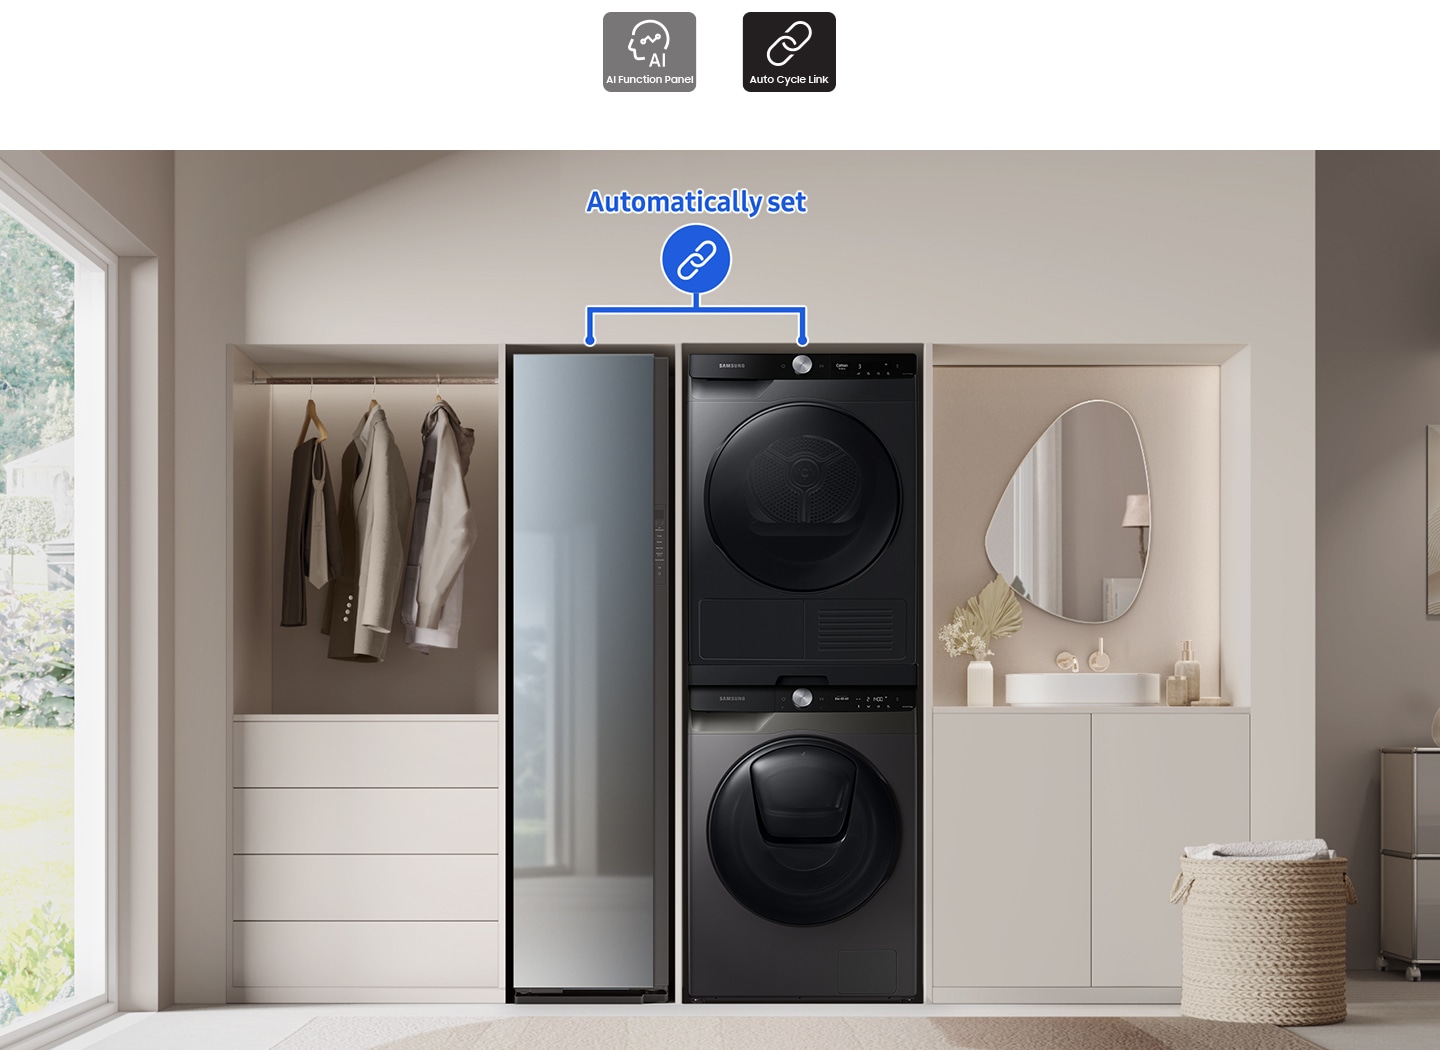 With Auto Cycle Link, Bespoke AirDresser can Automatically be linked with Samsung Washer.